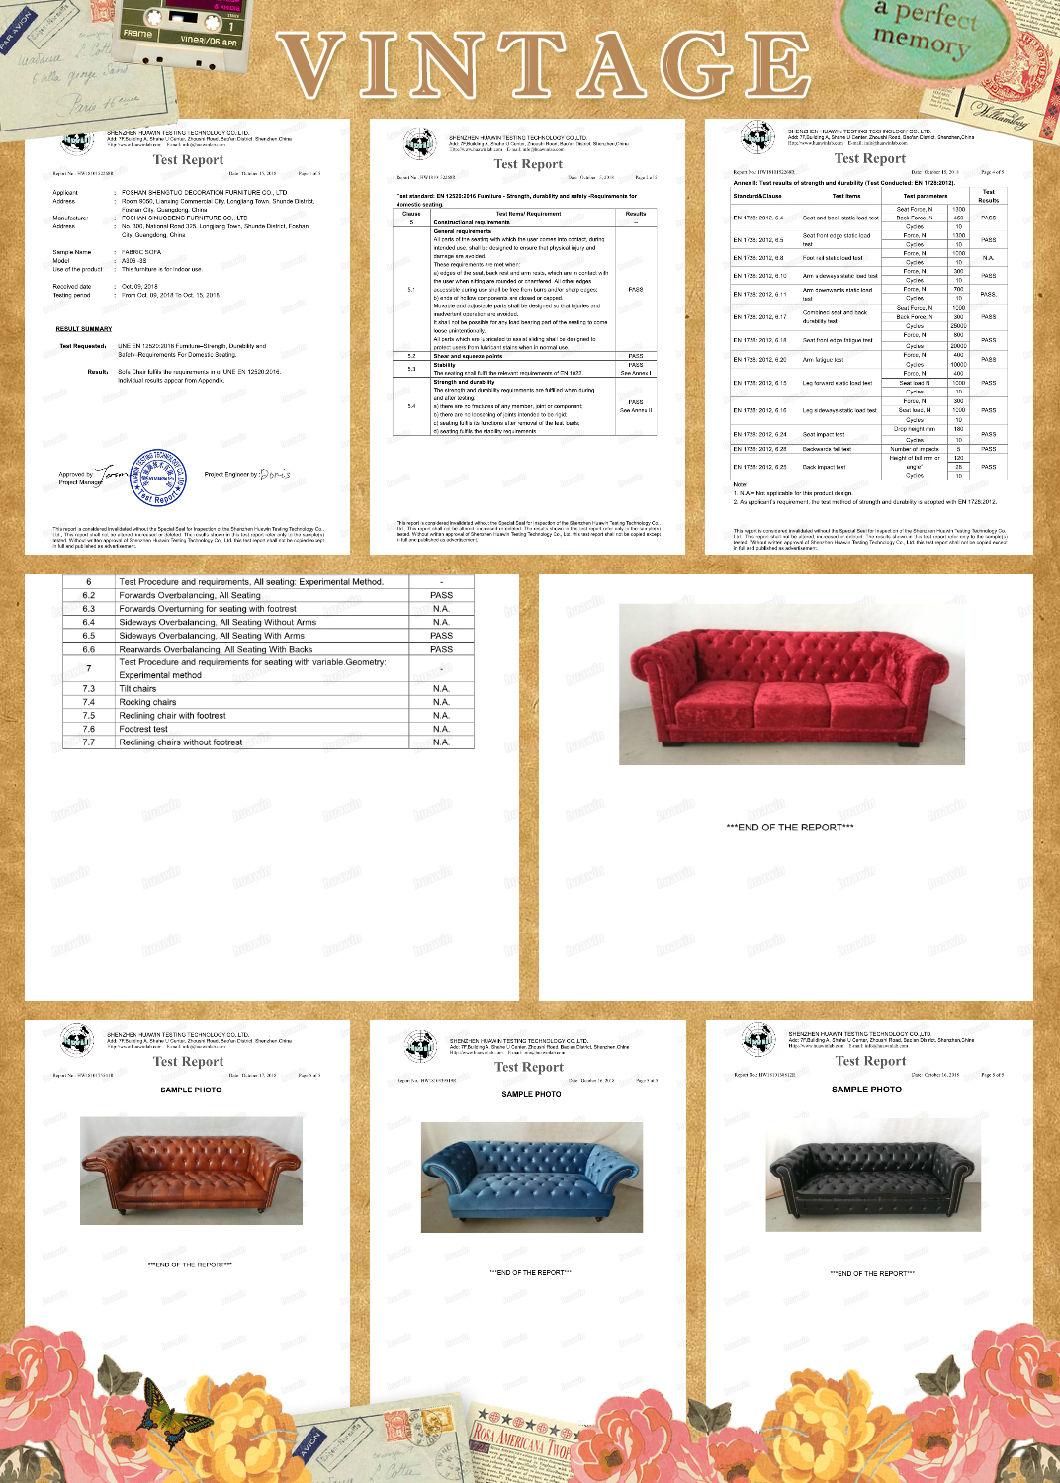 Italy Leather Sofa Manufacturer Bright Leather Sofa Home Sofa Drawing Room Sofas